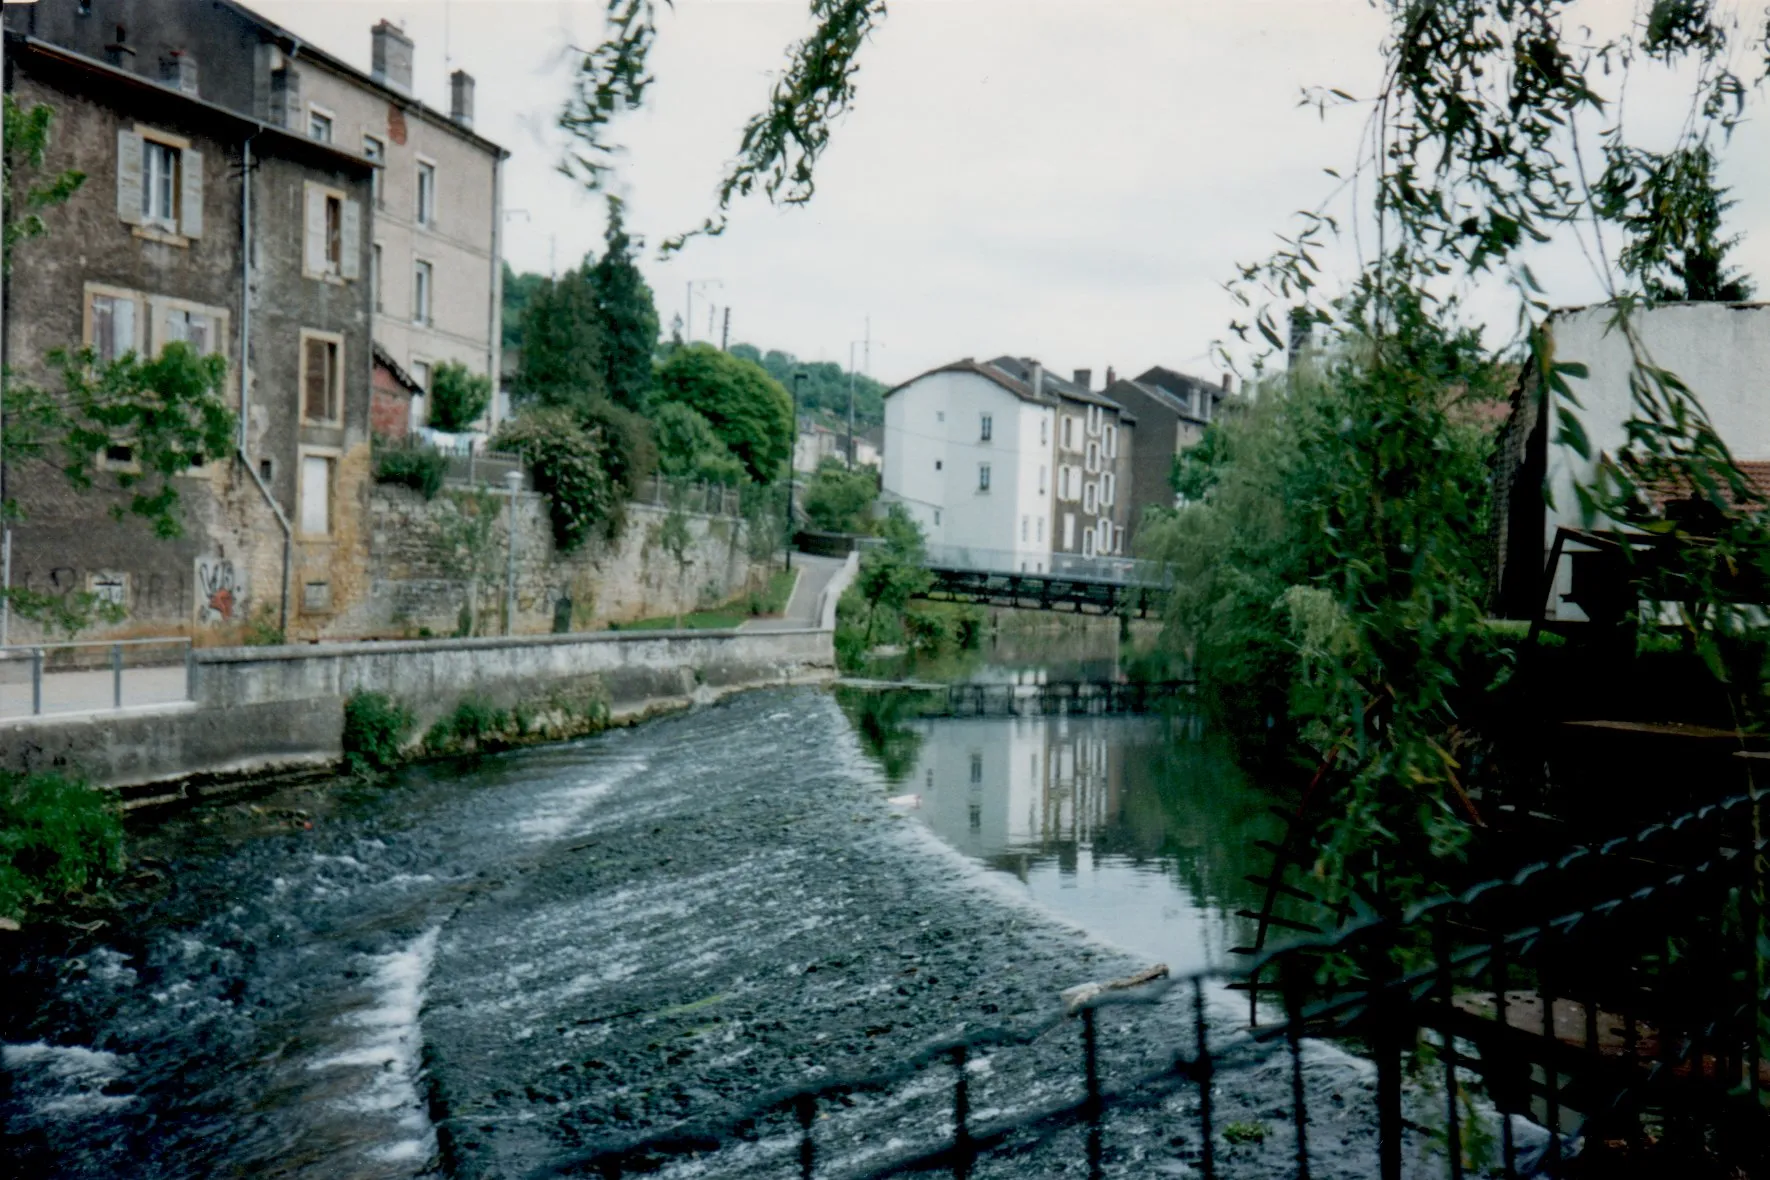 Photo showing: The Crusnes river in Longuyon, France